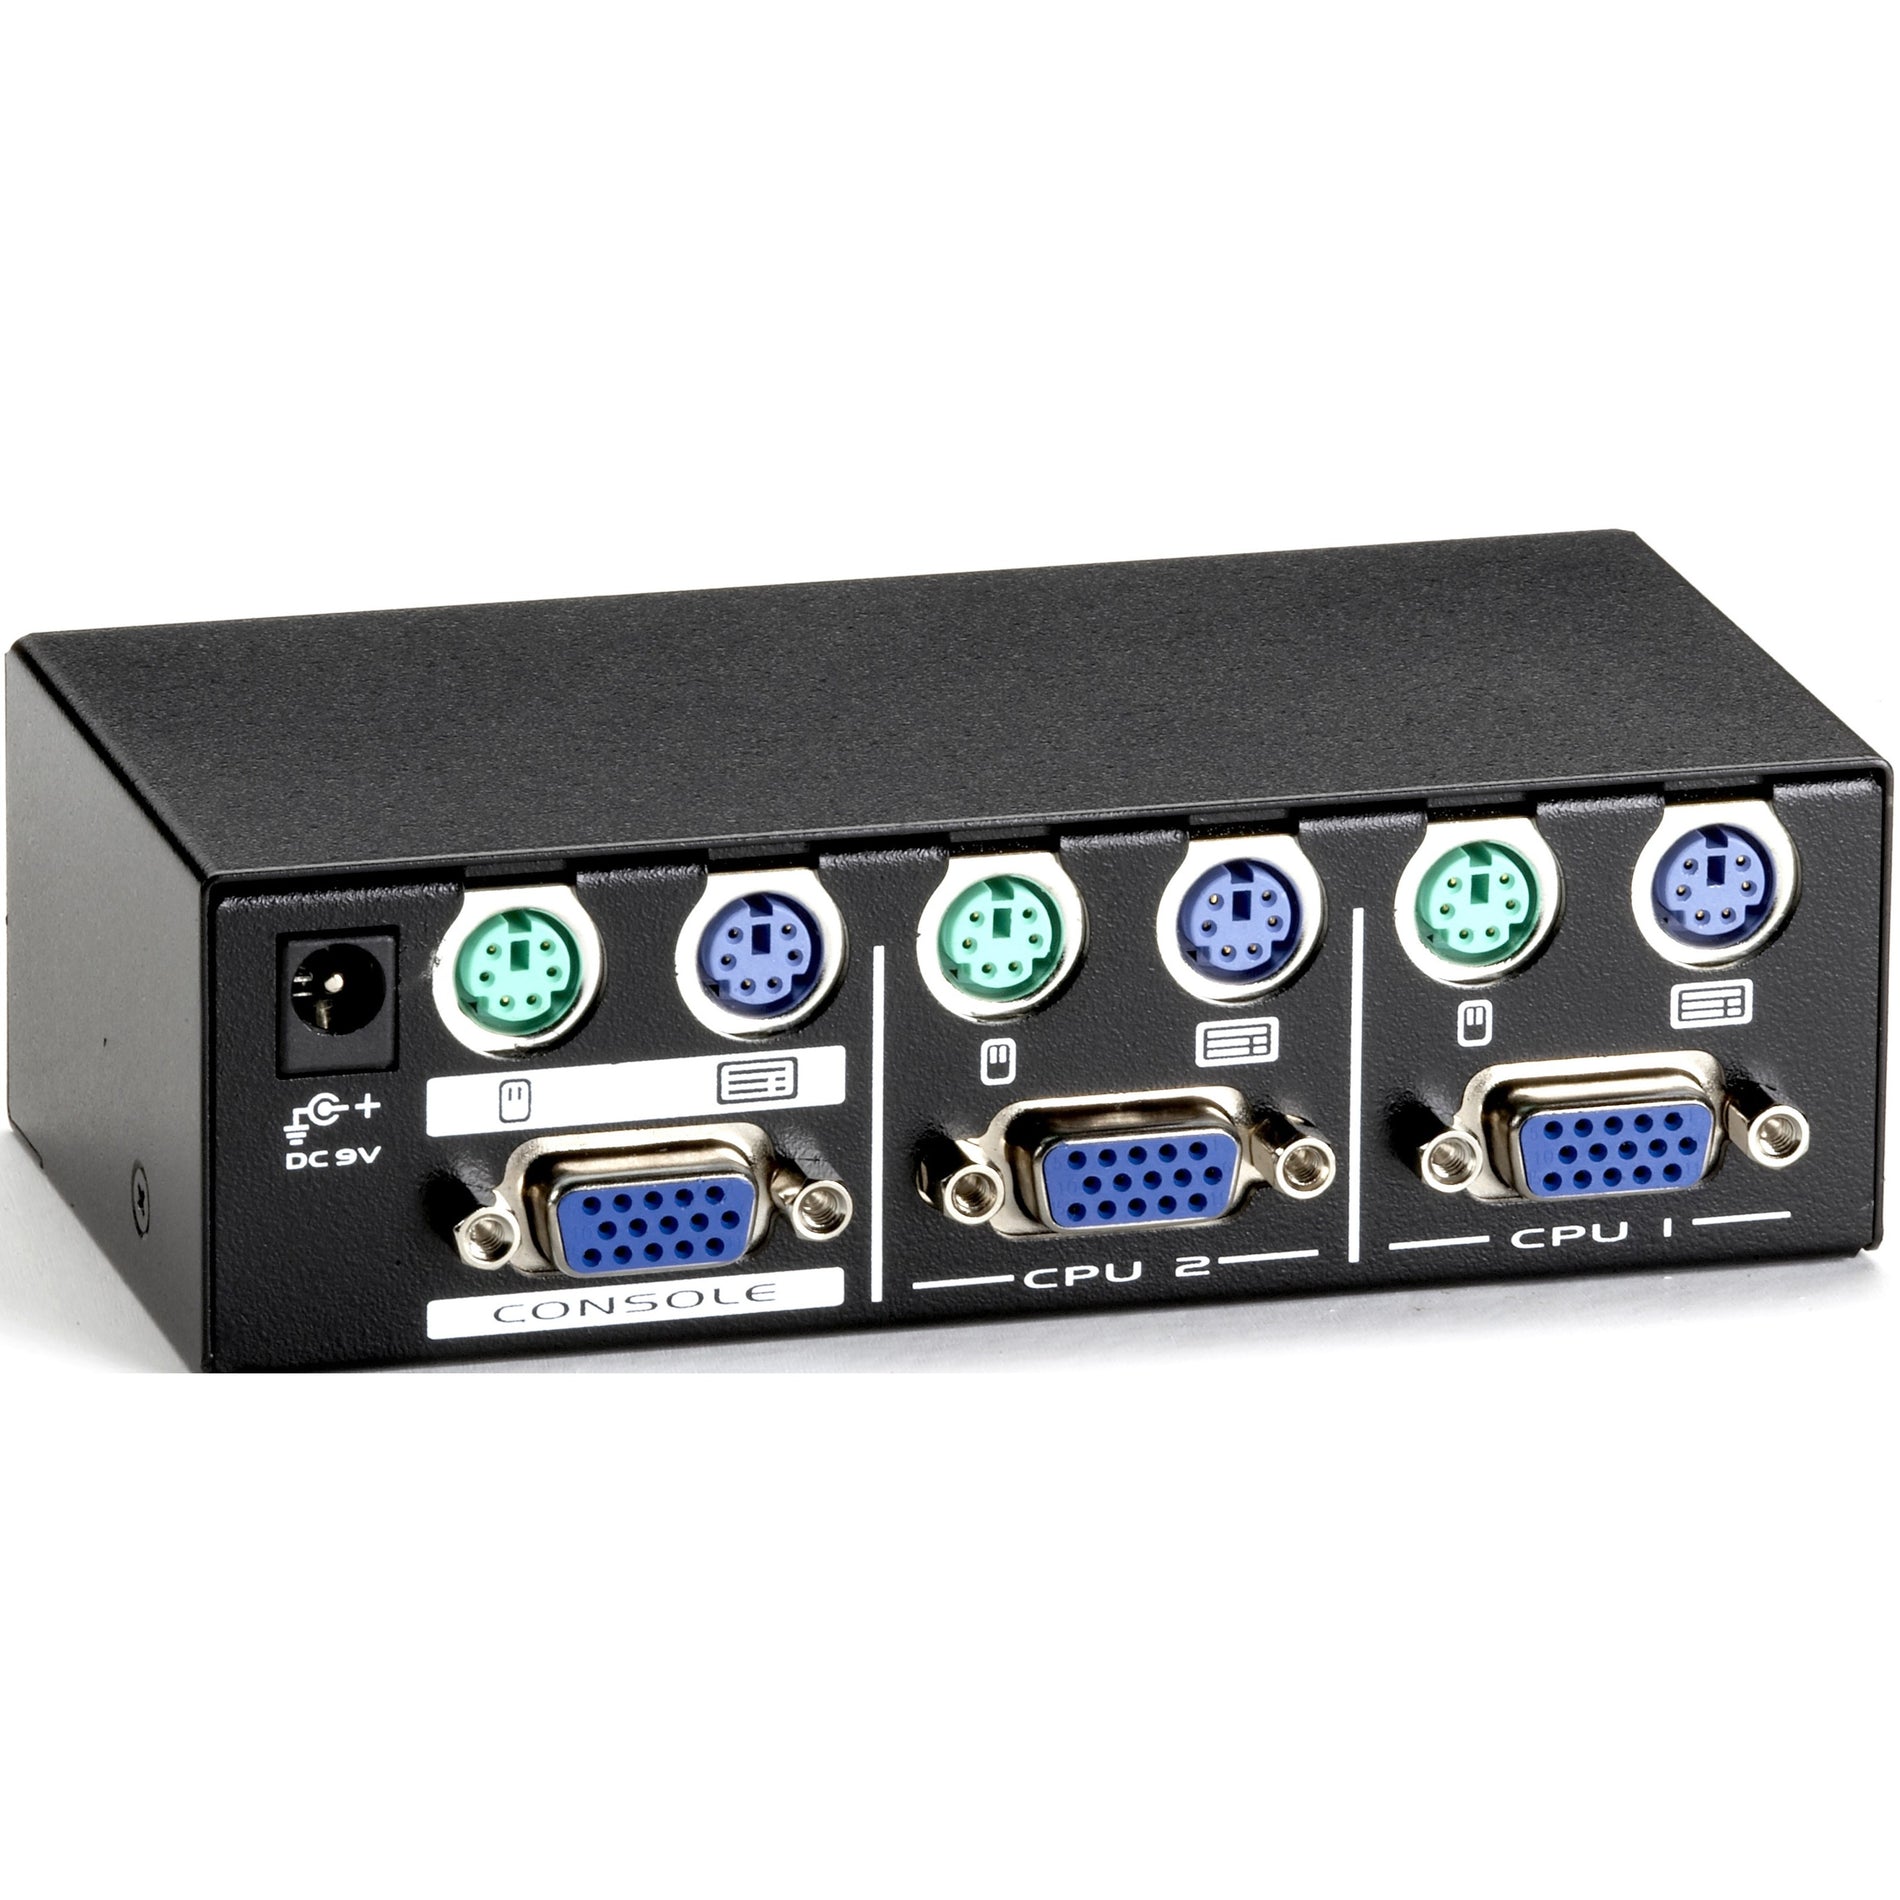 Black Box KV7022A ServSwitch DT Basic II KVM Switch, PS/2 Port, 2 Computers Supported